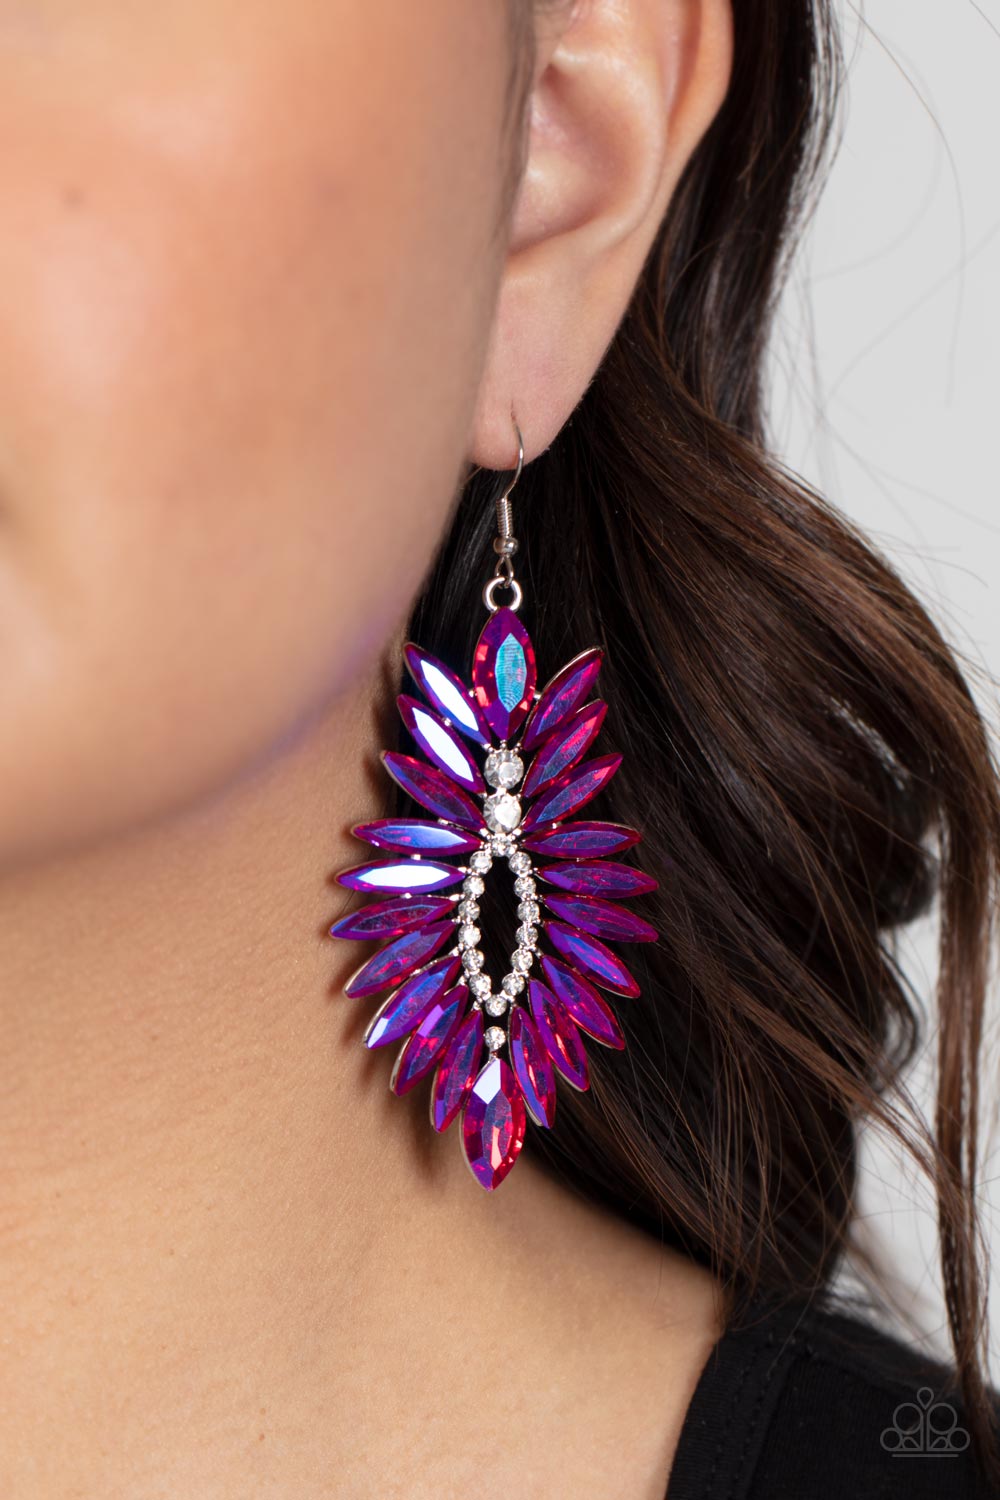 Turn up the Luxe - Pink Paparazzi Earrings